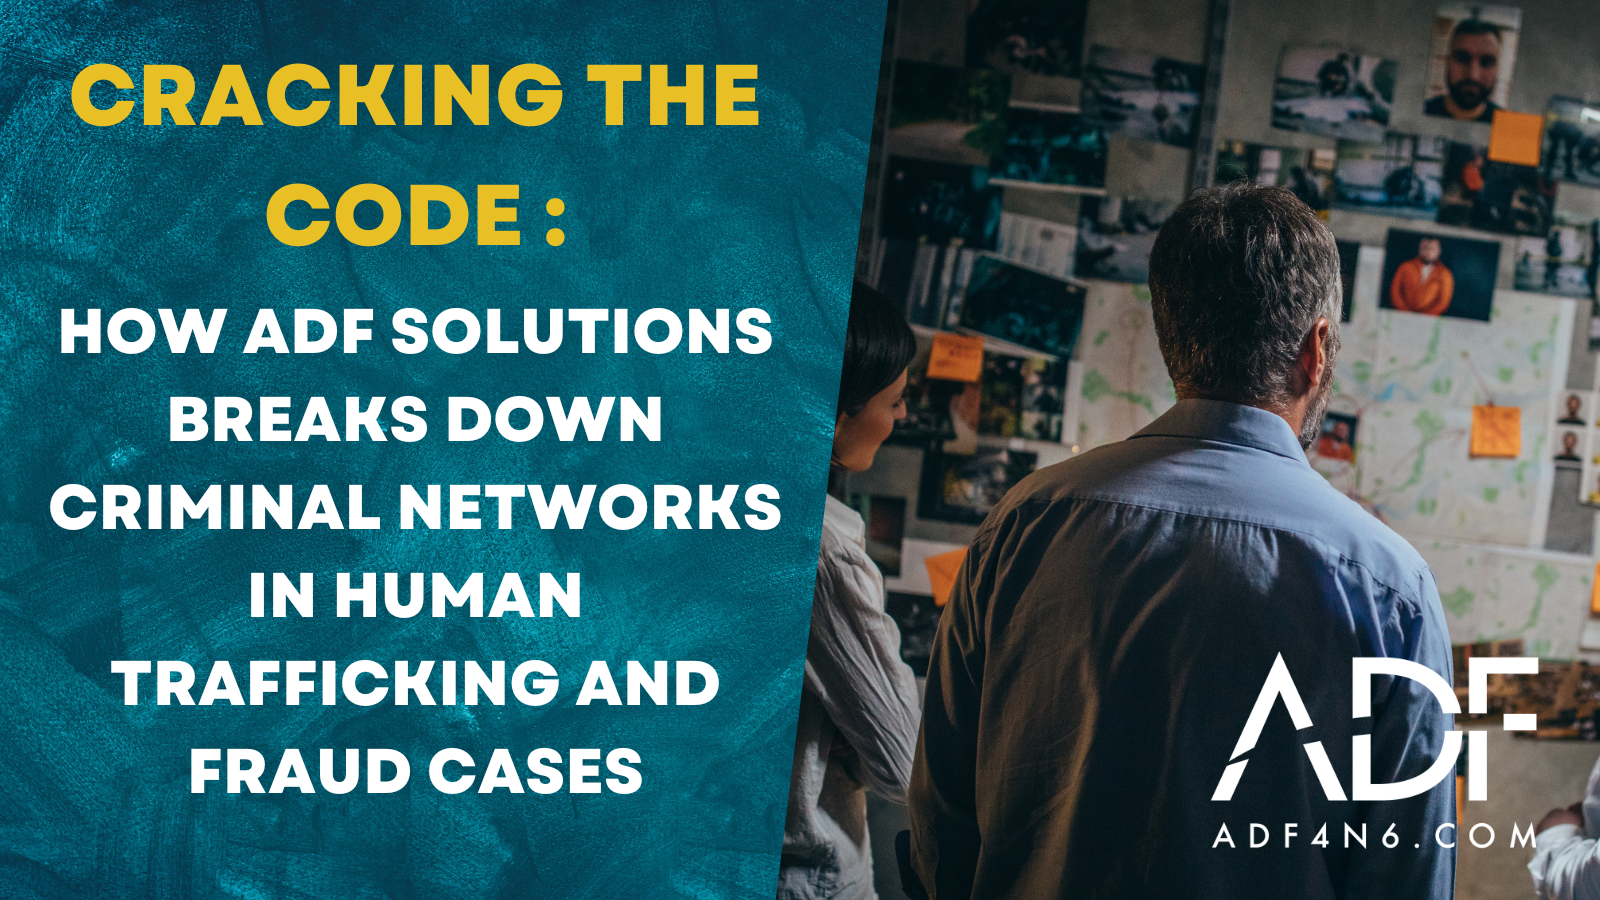 Cracking the Code: How ADF Breaks Down Criminal Networks